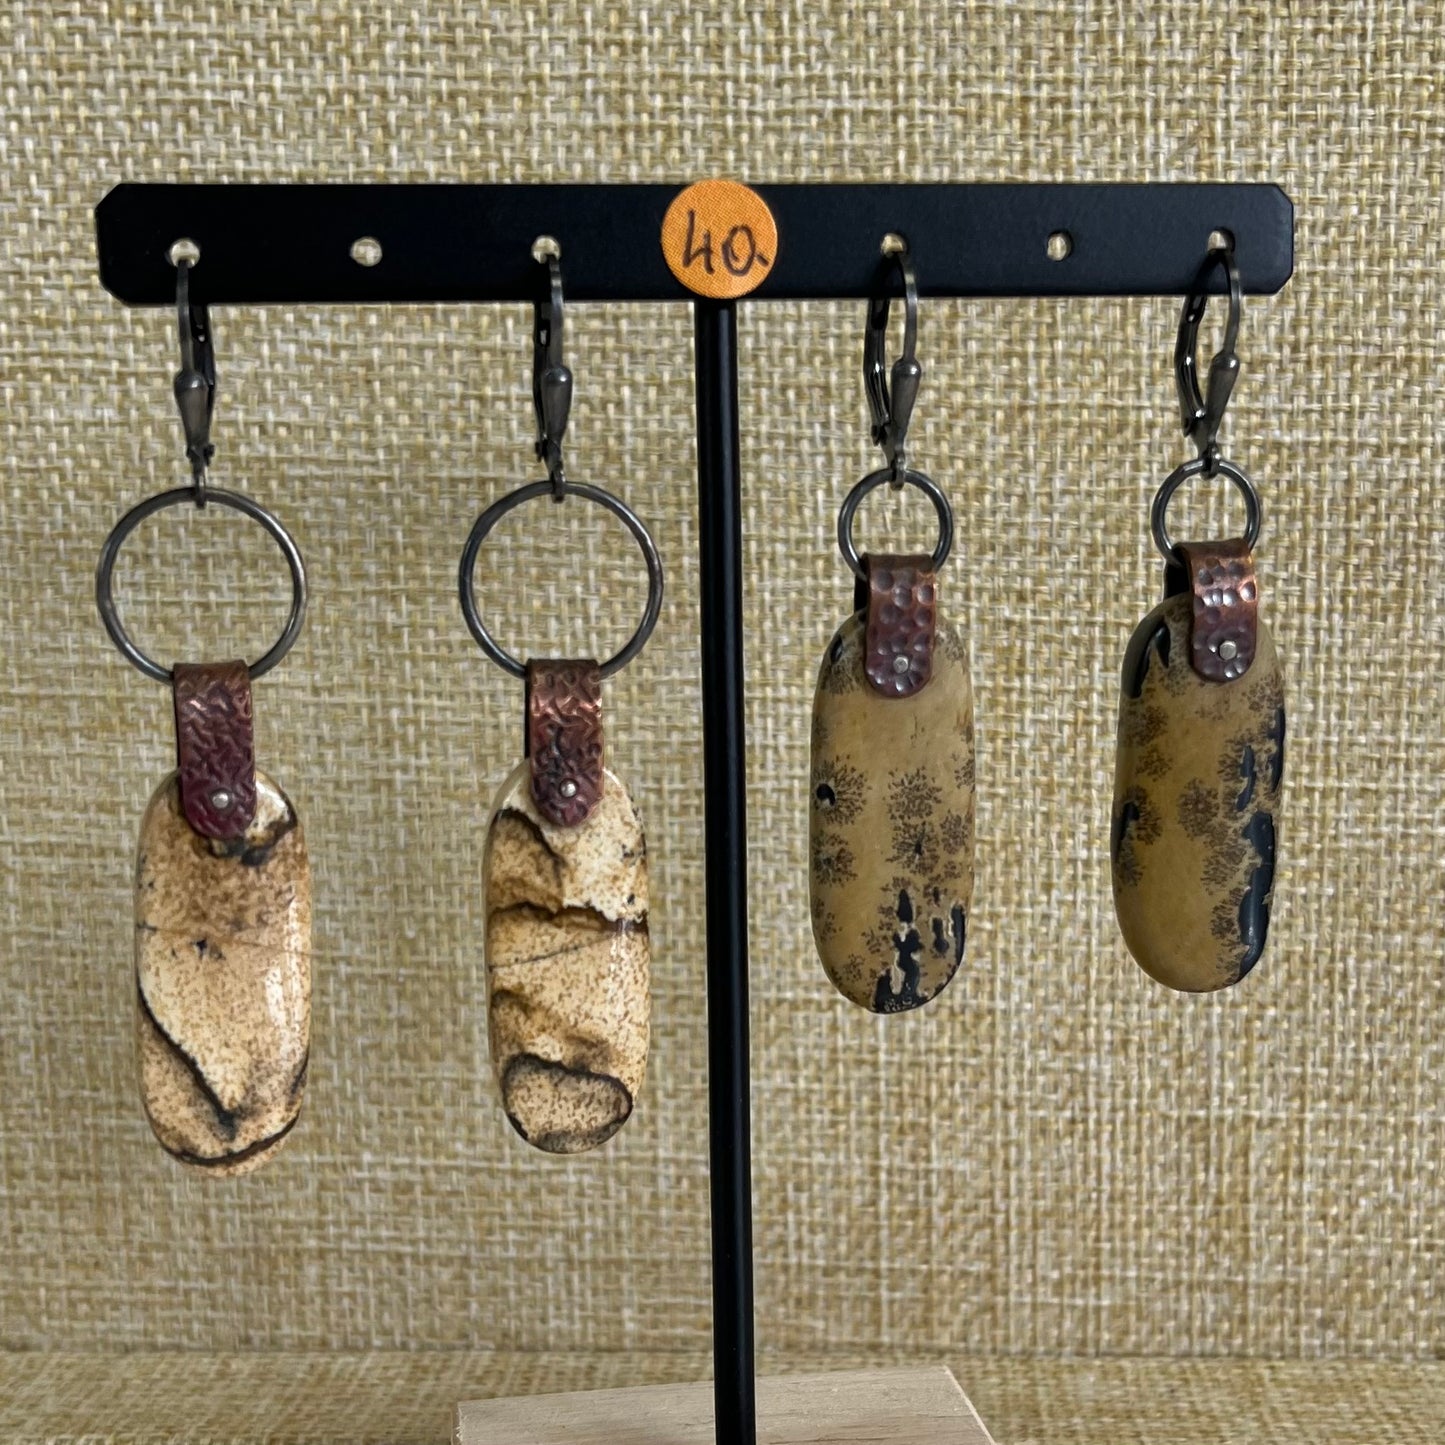 Brass earrings with natural stones